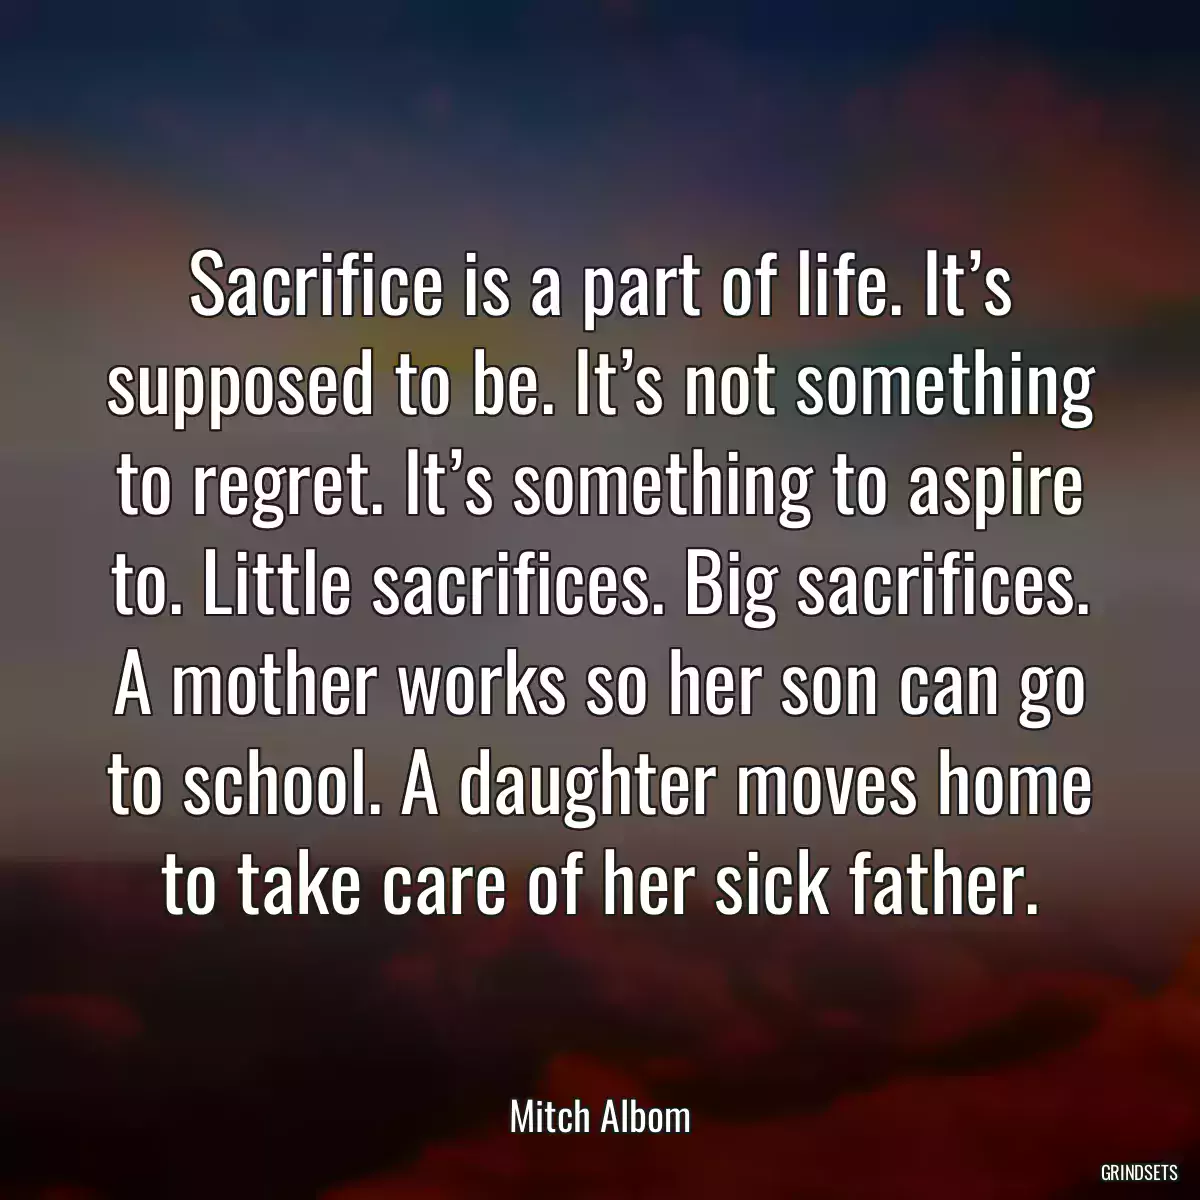 Sacrifice is a part of life. It’s supposed to be. It’s not something to regret. It’s something to aspire to. Little sacrifices. Big sacrifices. A mother works so her son can go to school. A daughter moves home to take care of her sick father.